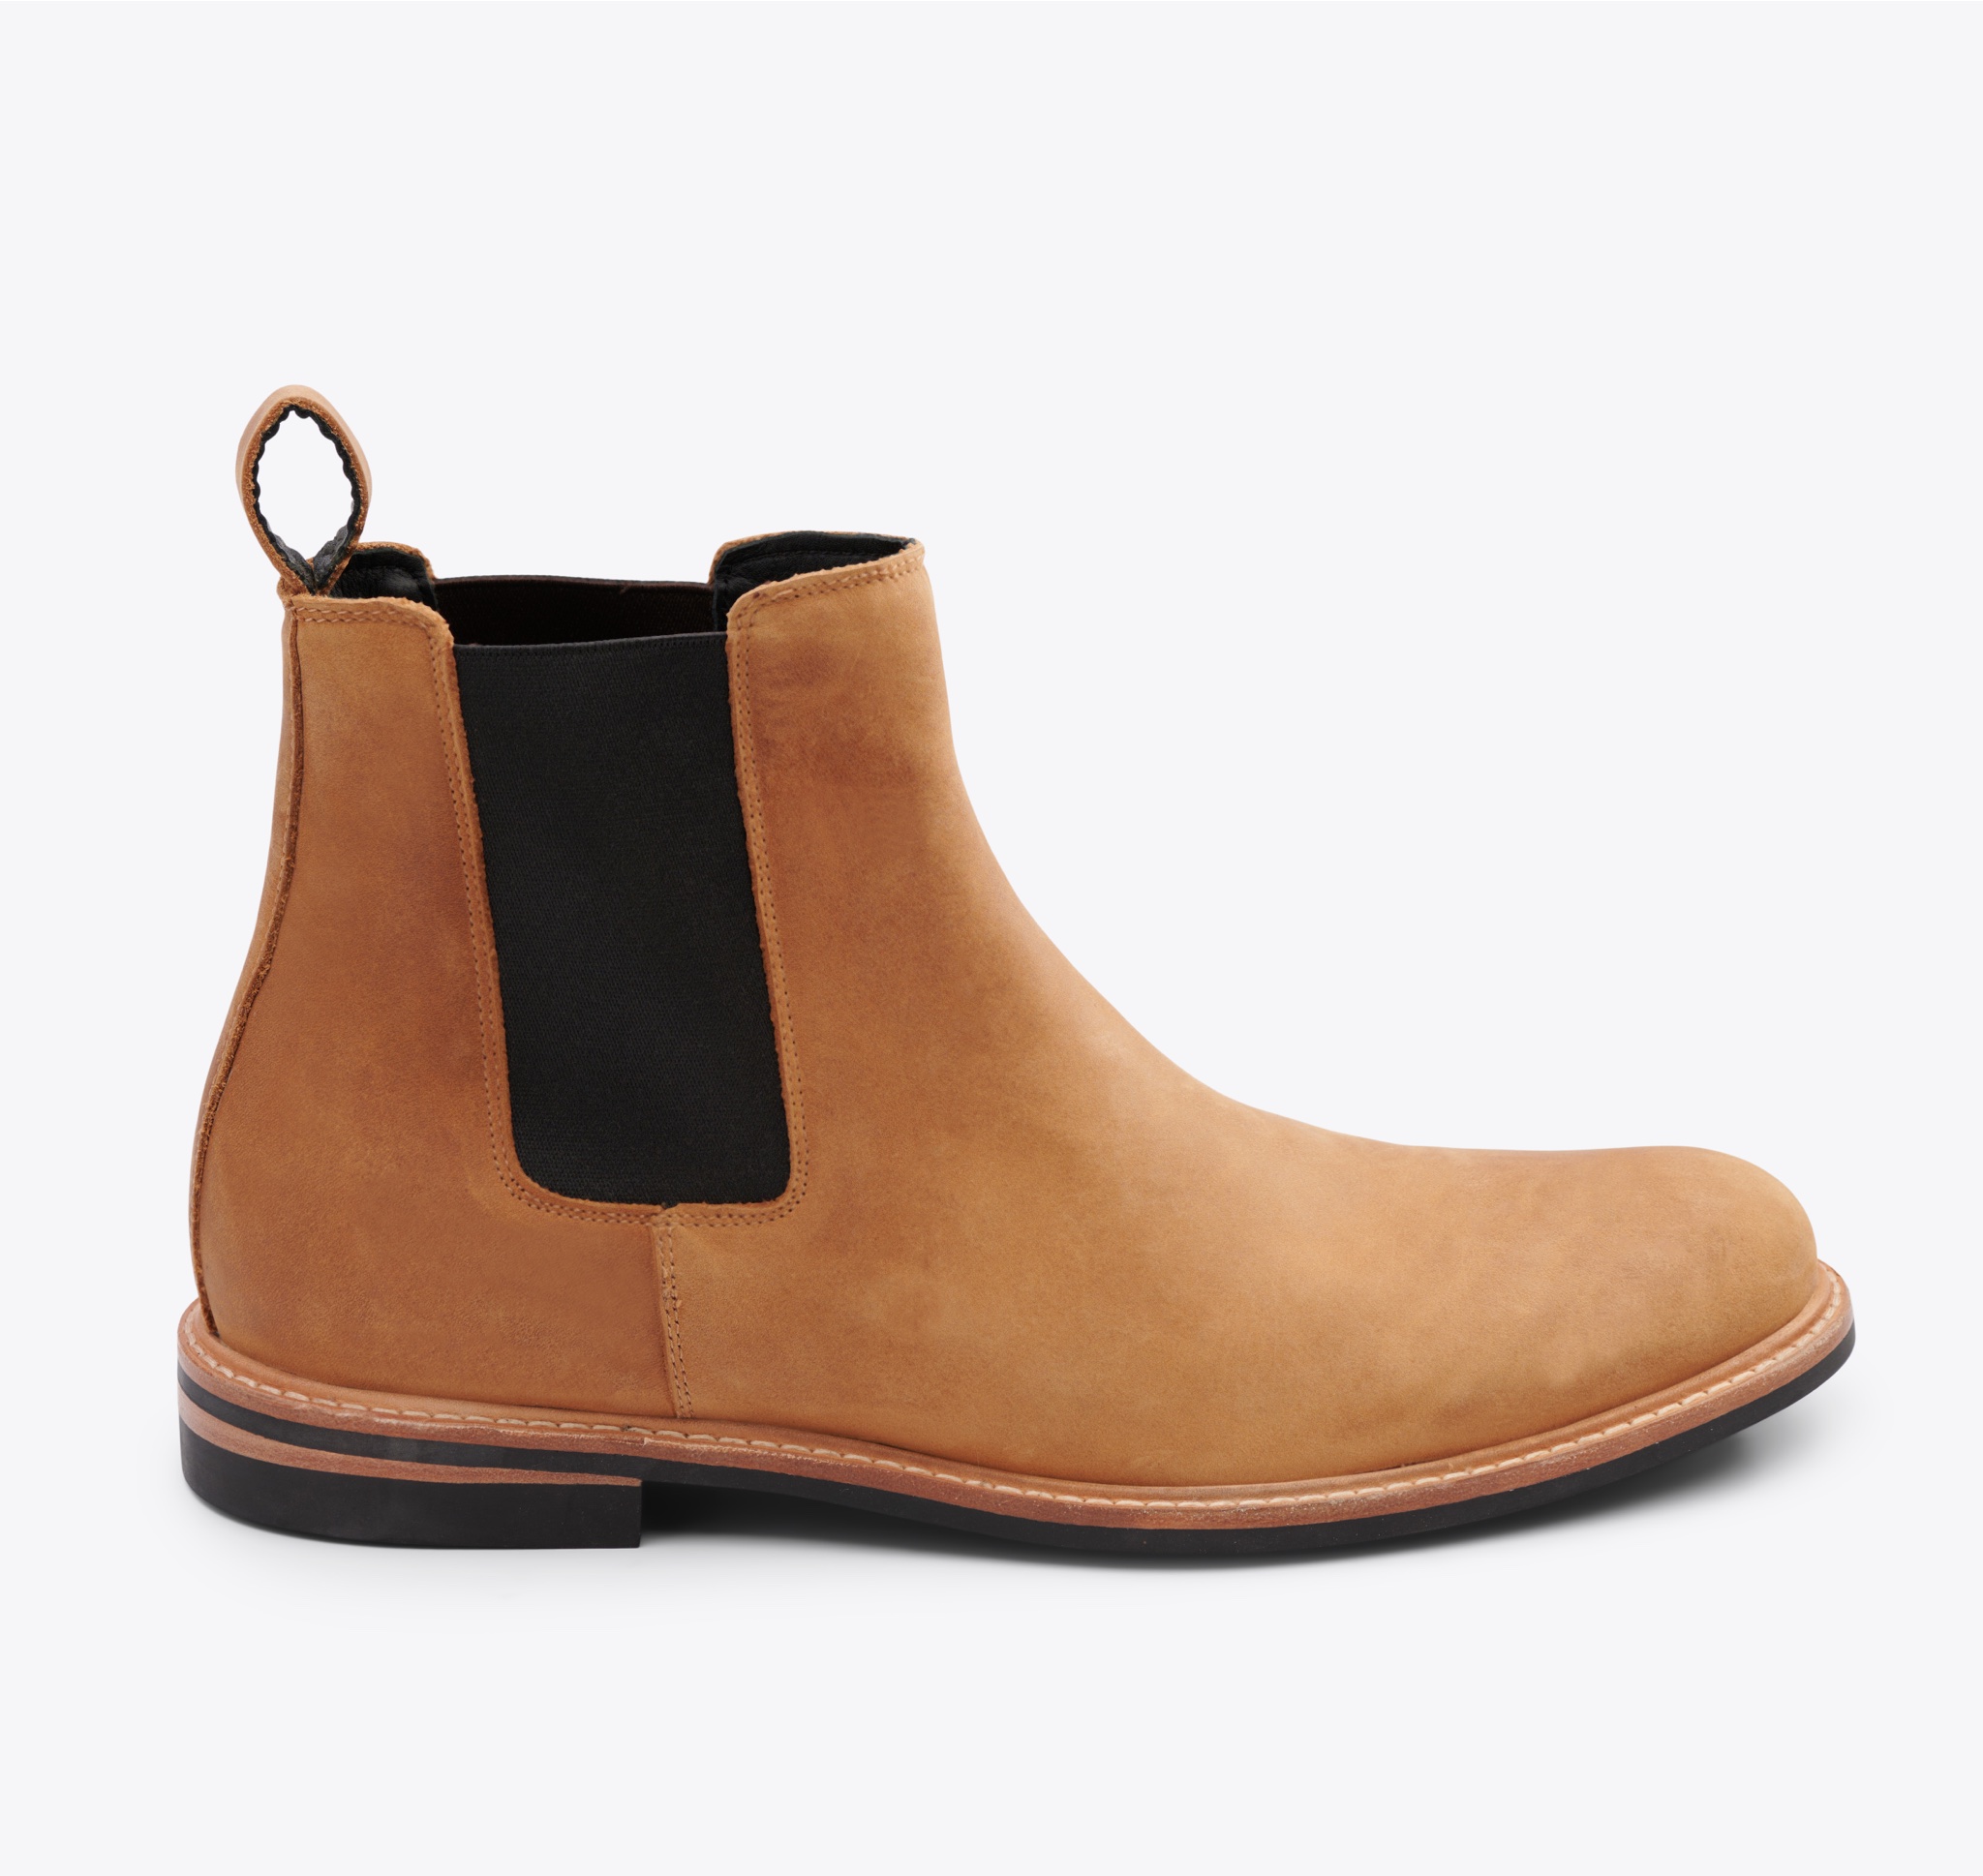 All-Weather Boot Tobacco